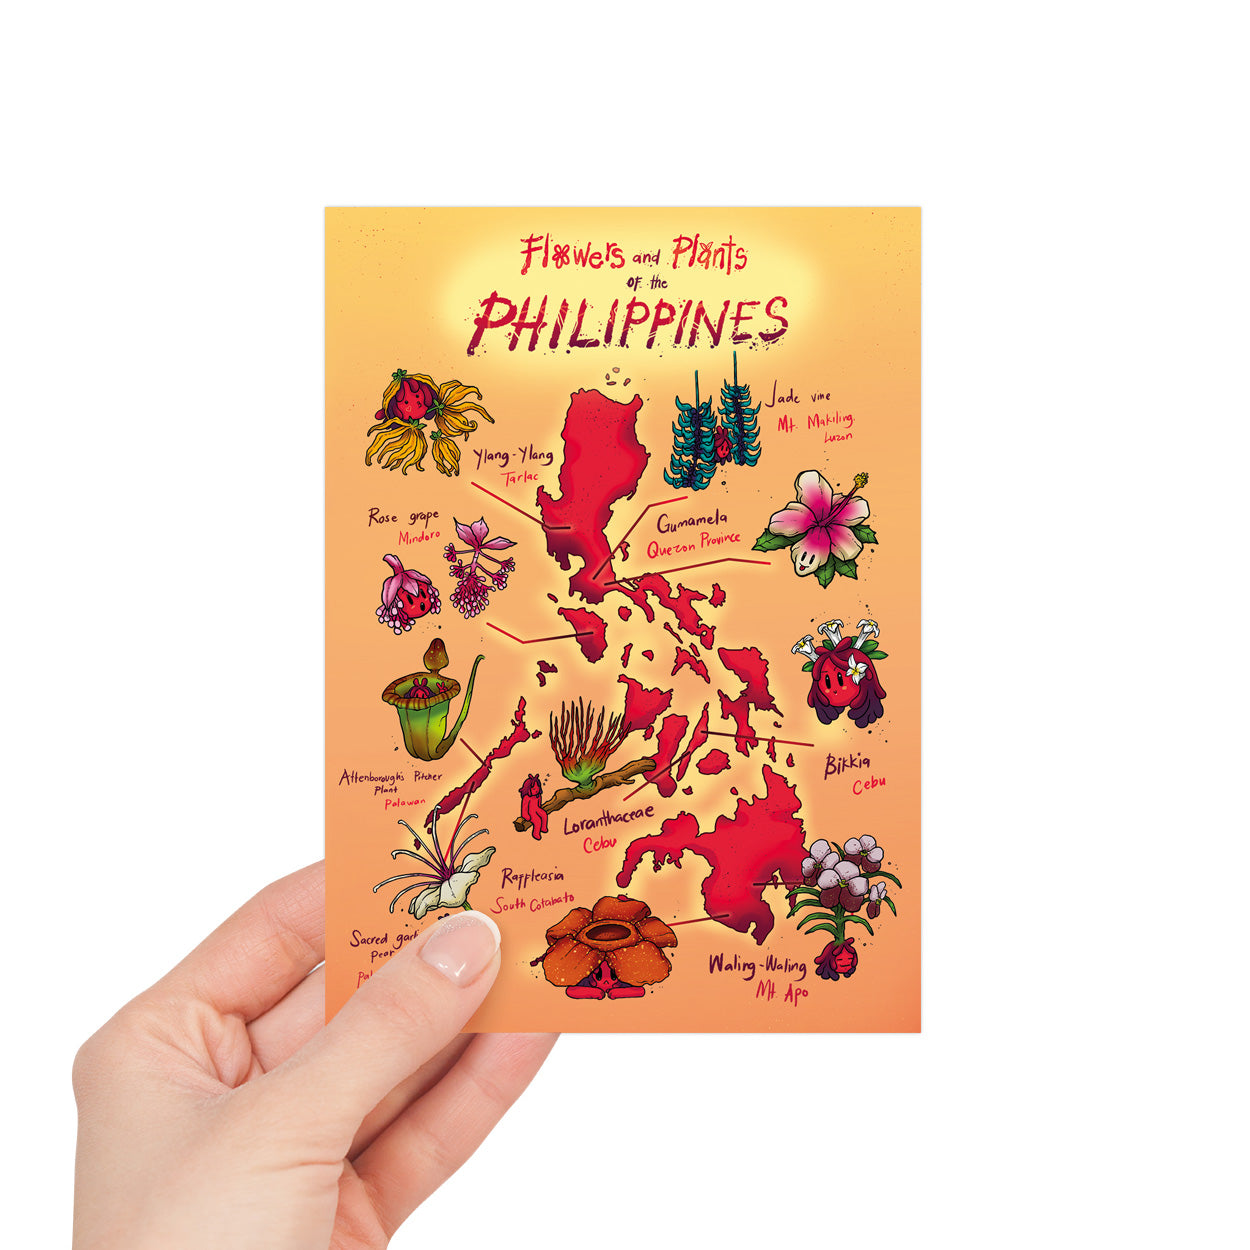 Flowers Filipino Flora Cil Flores Dumaguete city graphic artist map project exhibit Negros Oriental Pinspired Art Souvenirs Wall Art Decoration Pinta PH Maps Philippines Tourist Gift Hotel Hostel Resort gift idea snailmail postcrossing PH post PHL Post Office actual size